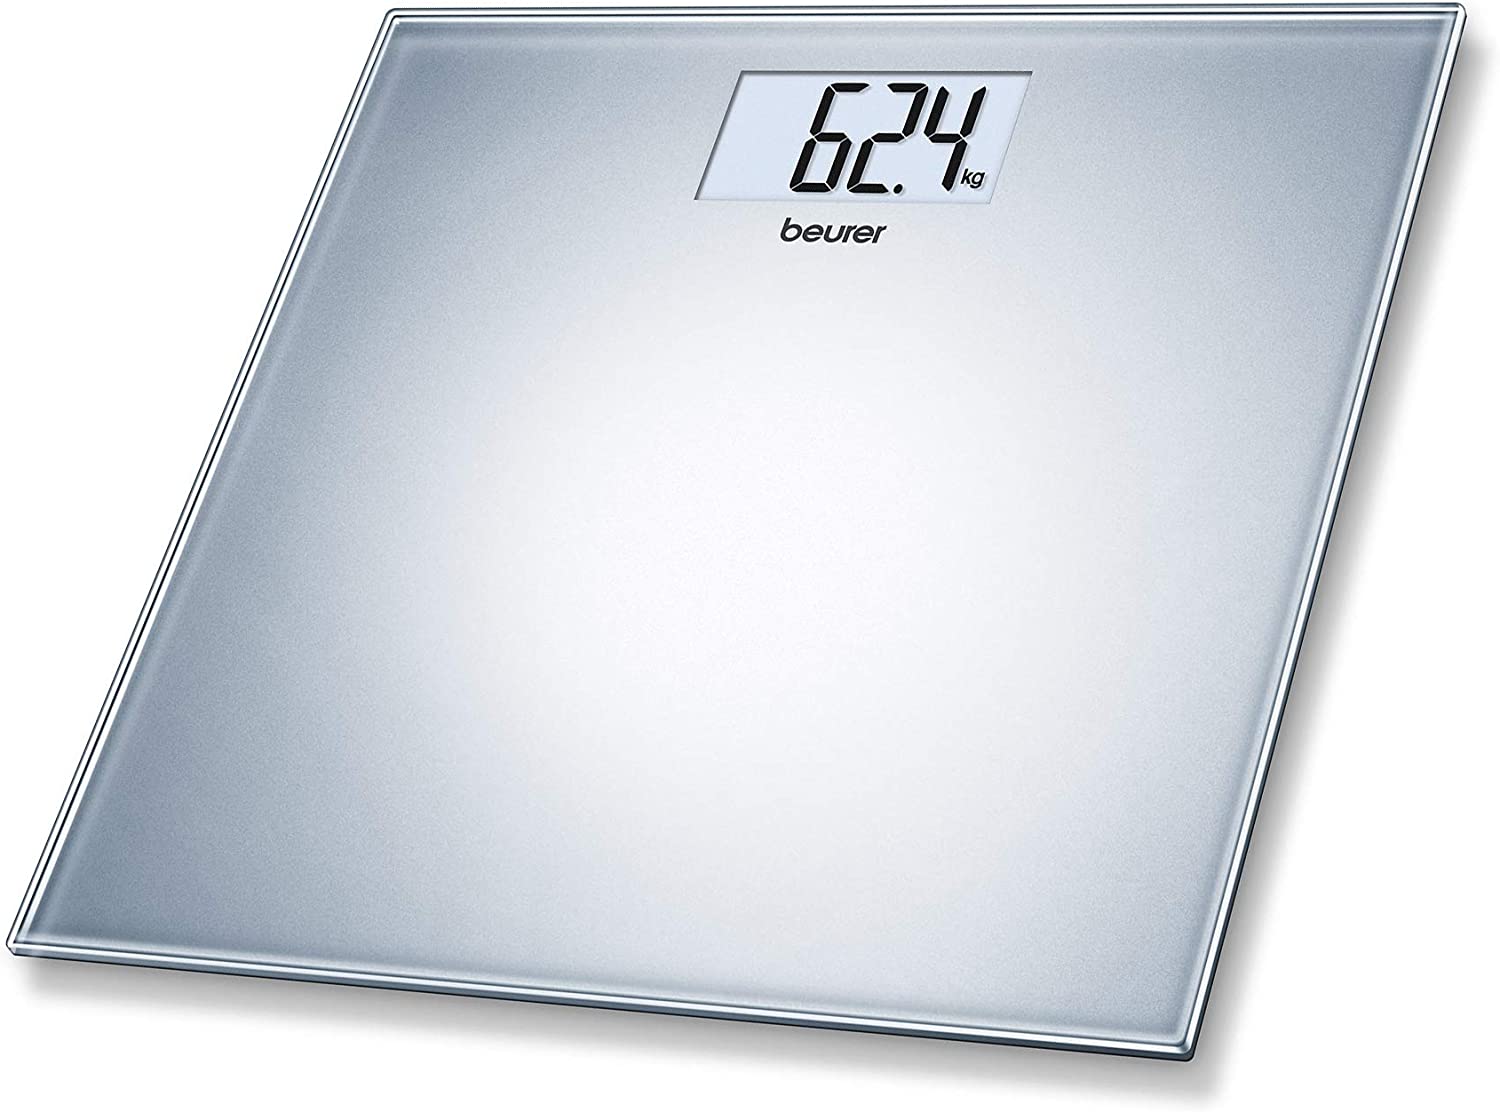 Beurer Silver-Plated Glass Bathroom Scales